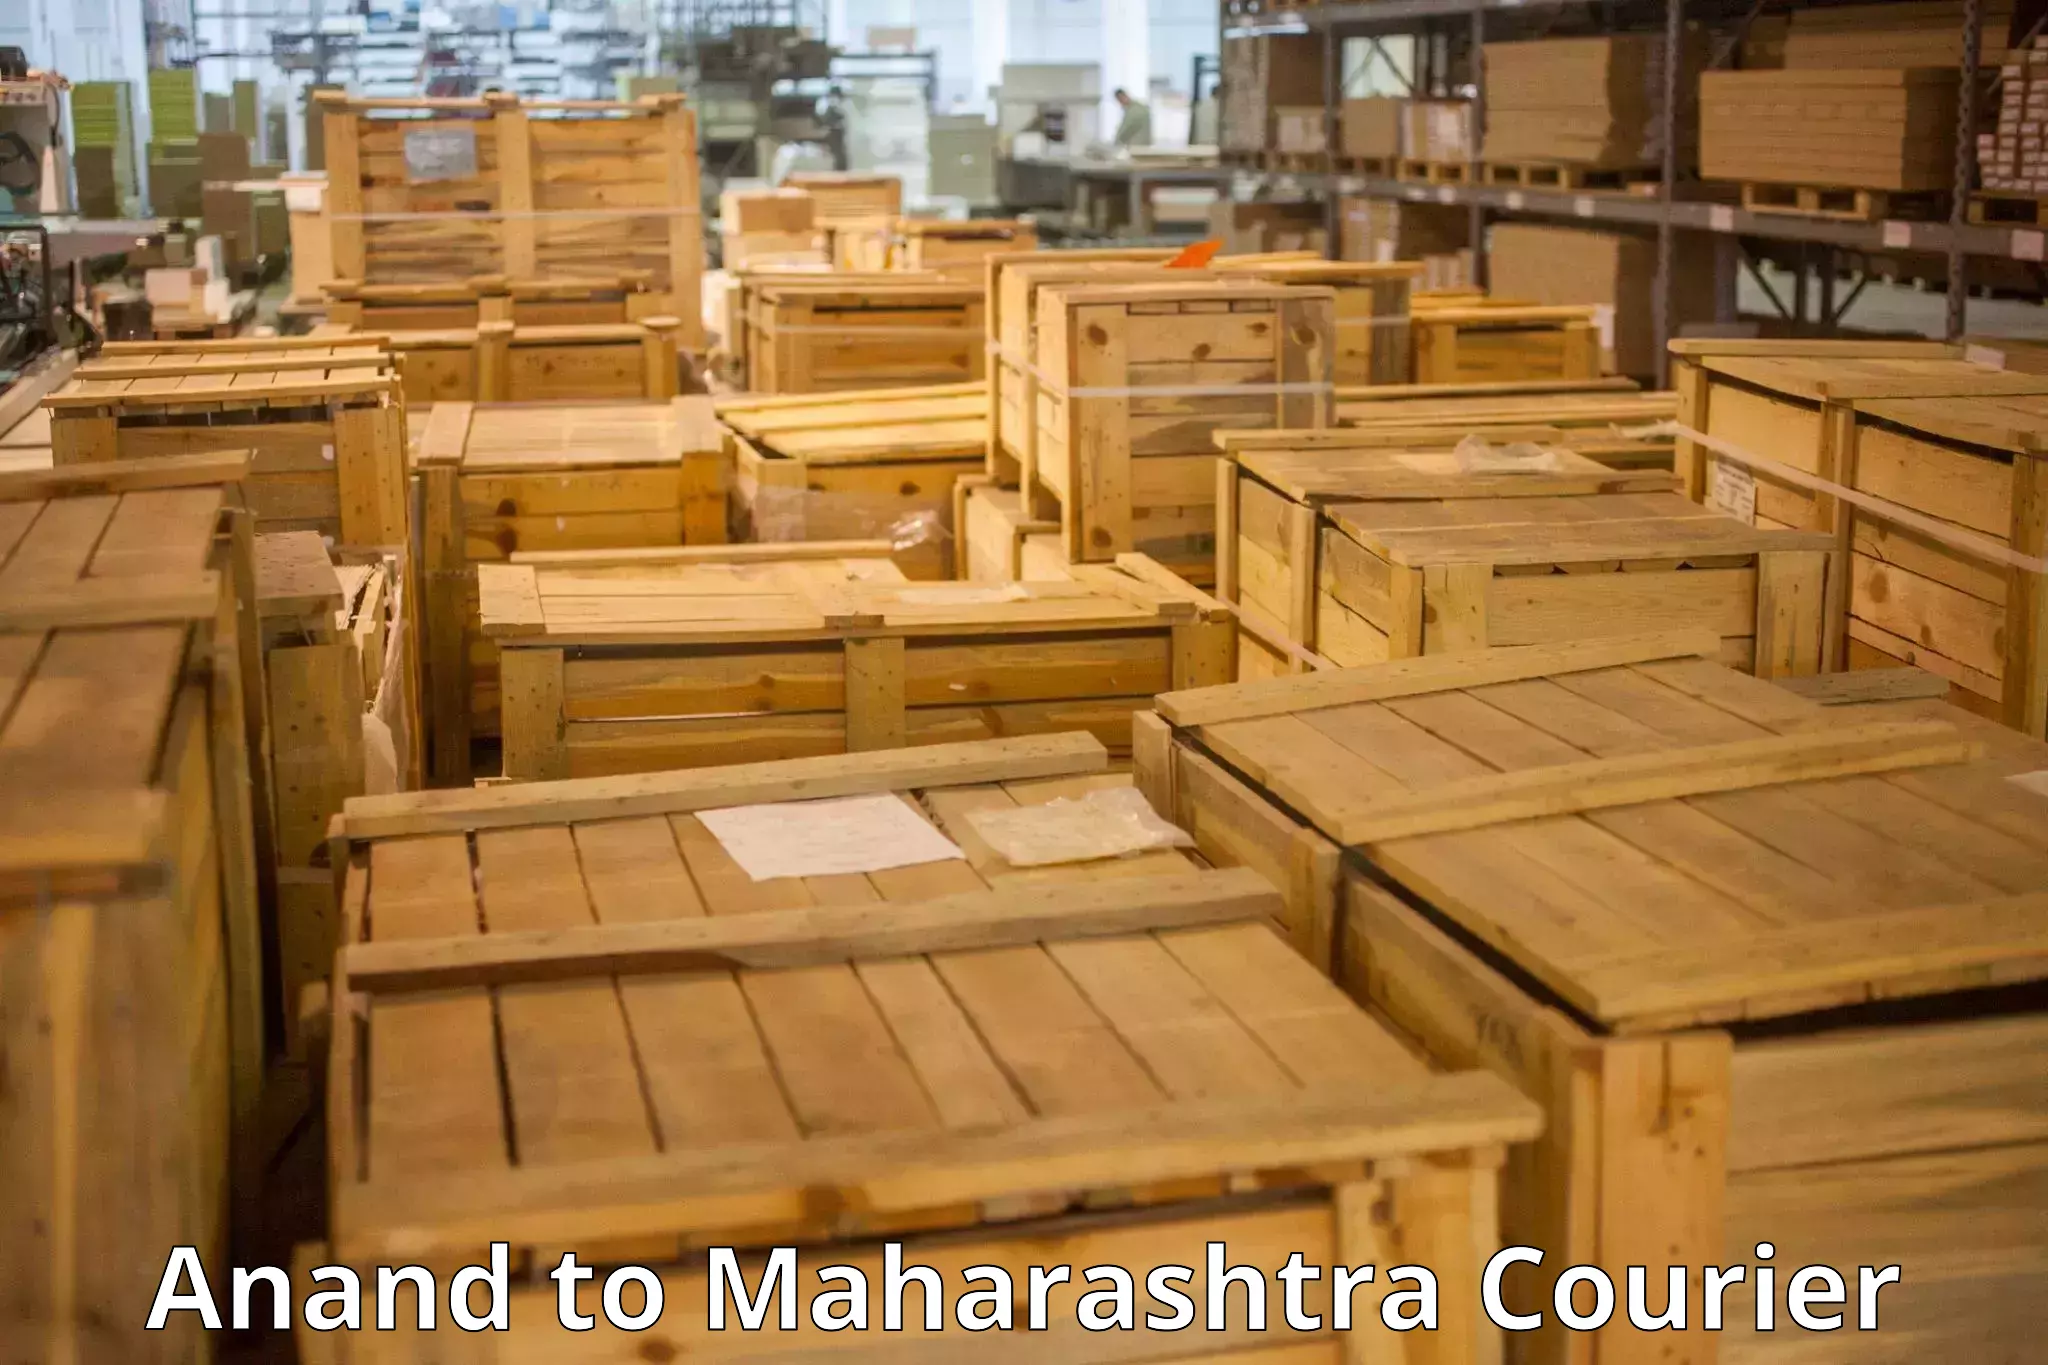 Luggage delivery network Anand to Maharashtra